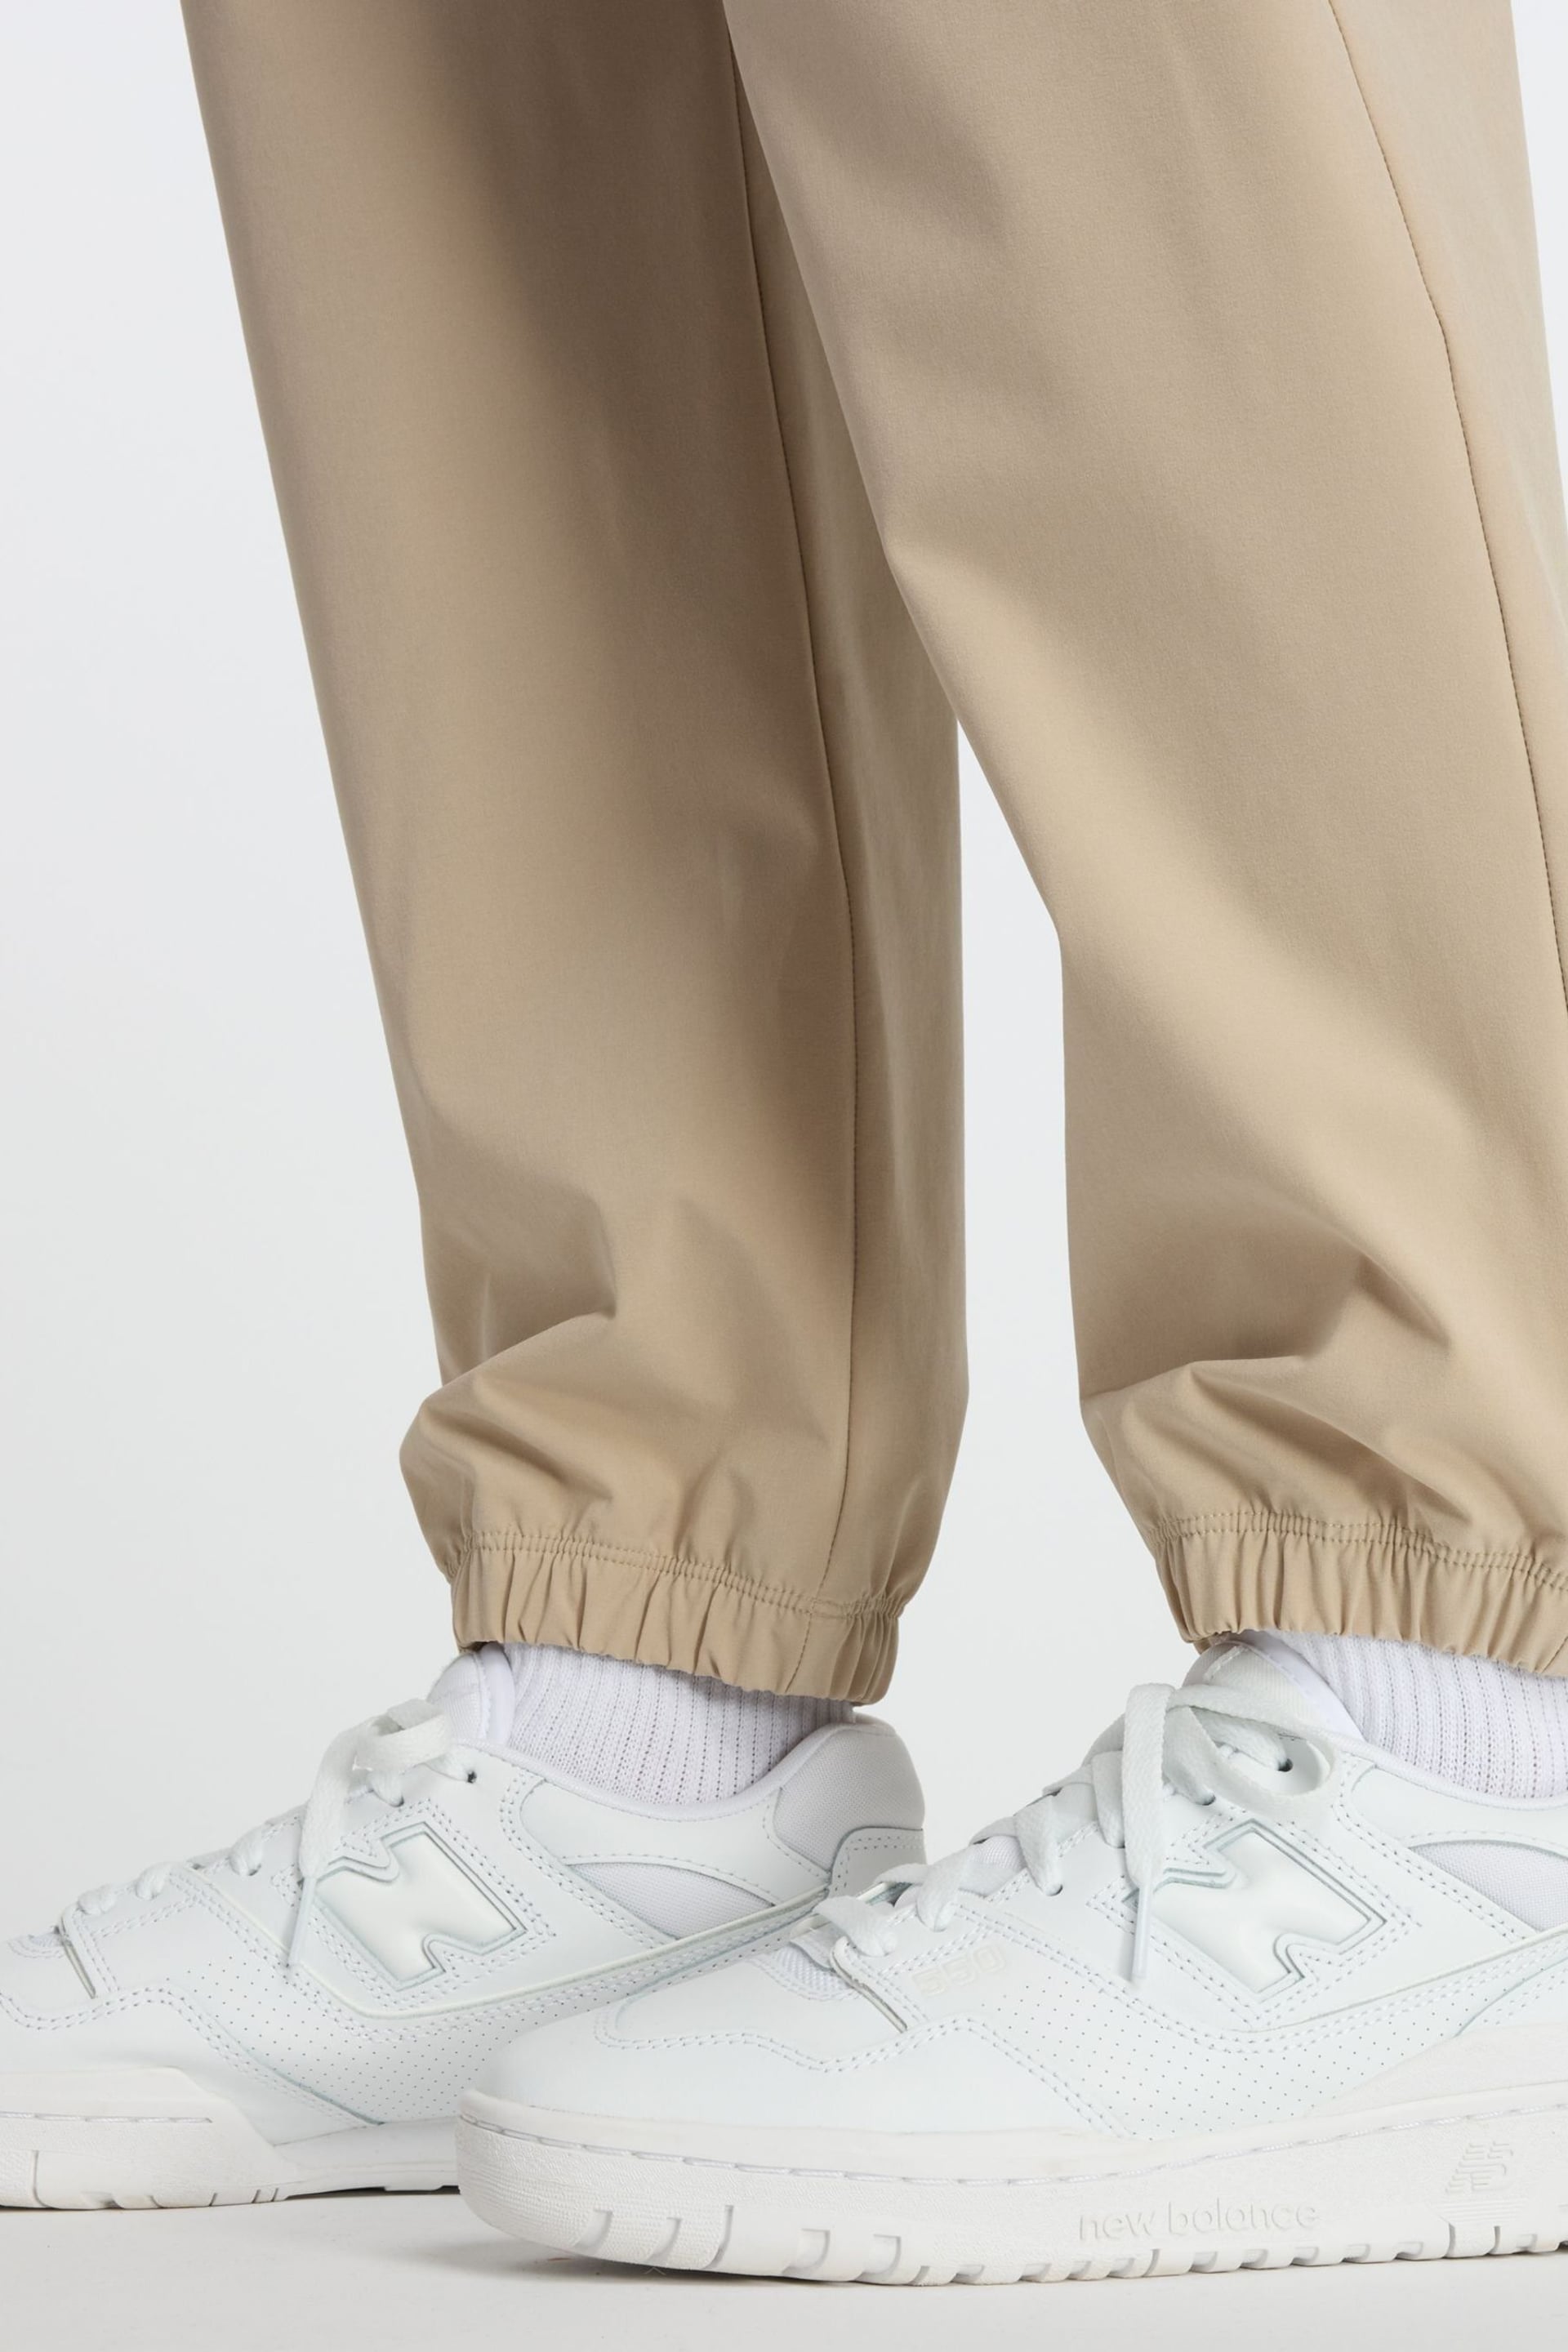 New Balance Brown Athletics Stretch Woven Joggers - Image 6 of 9